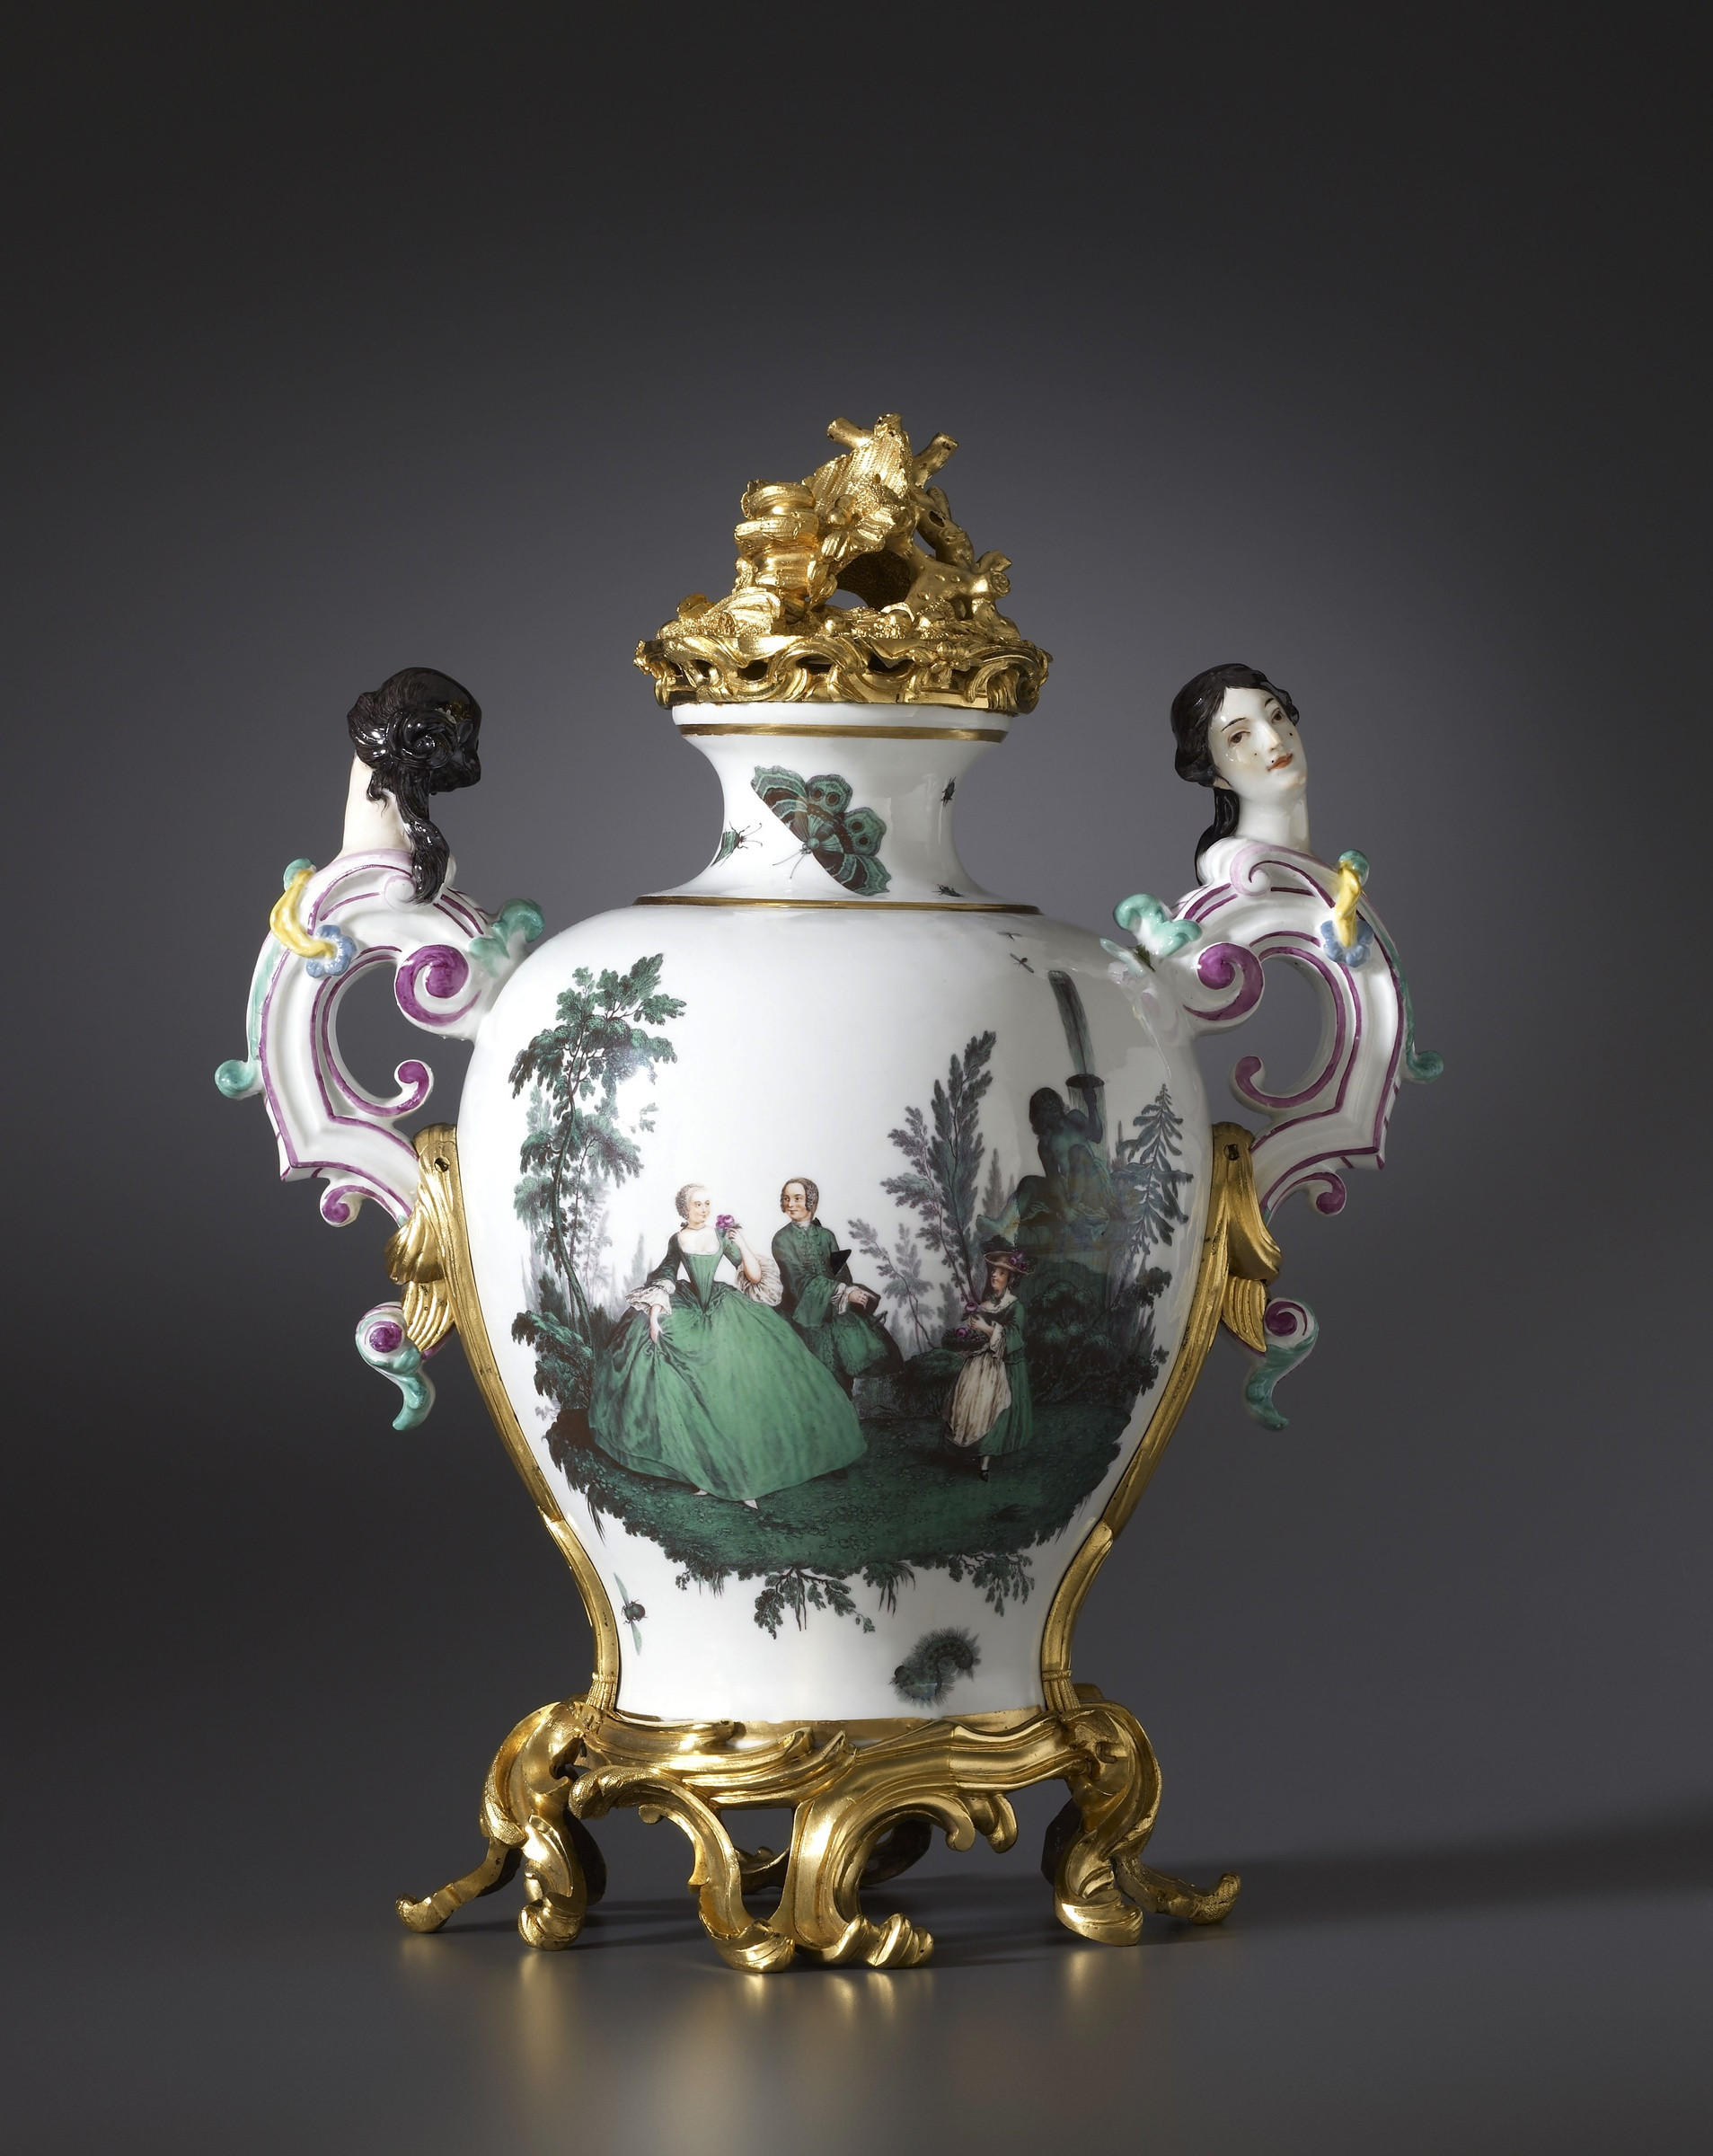 11 Lovely Pedestal Bowl Vase 2024 free download pedestal bowl vase of meissen a louis xv vase by meissen almost certainly modelled by pertaining to a louis xv vase by meissen almost certainly modelled by johann joachim kac2a4ndler